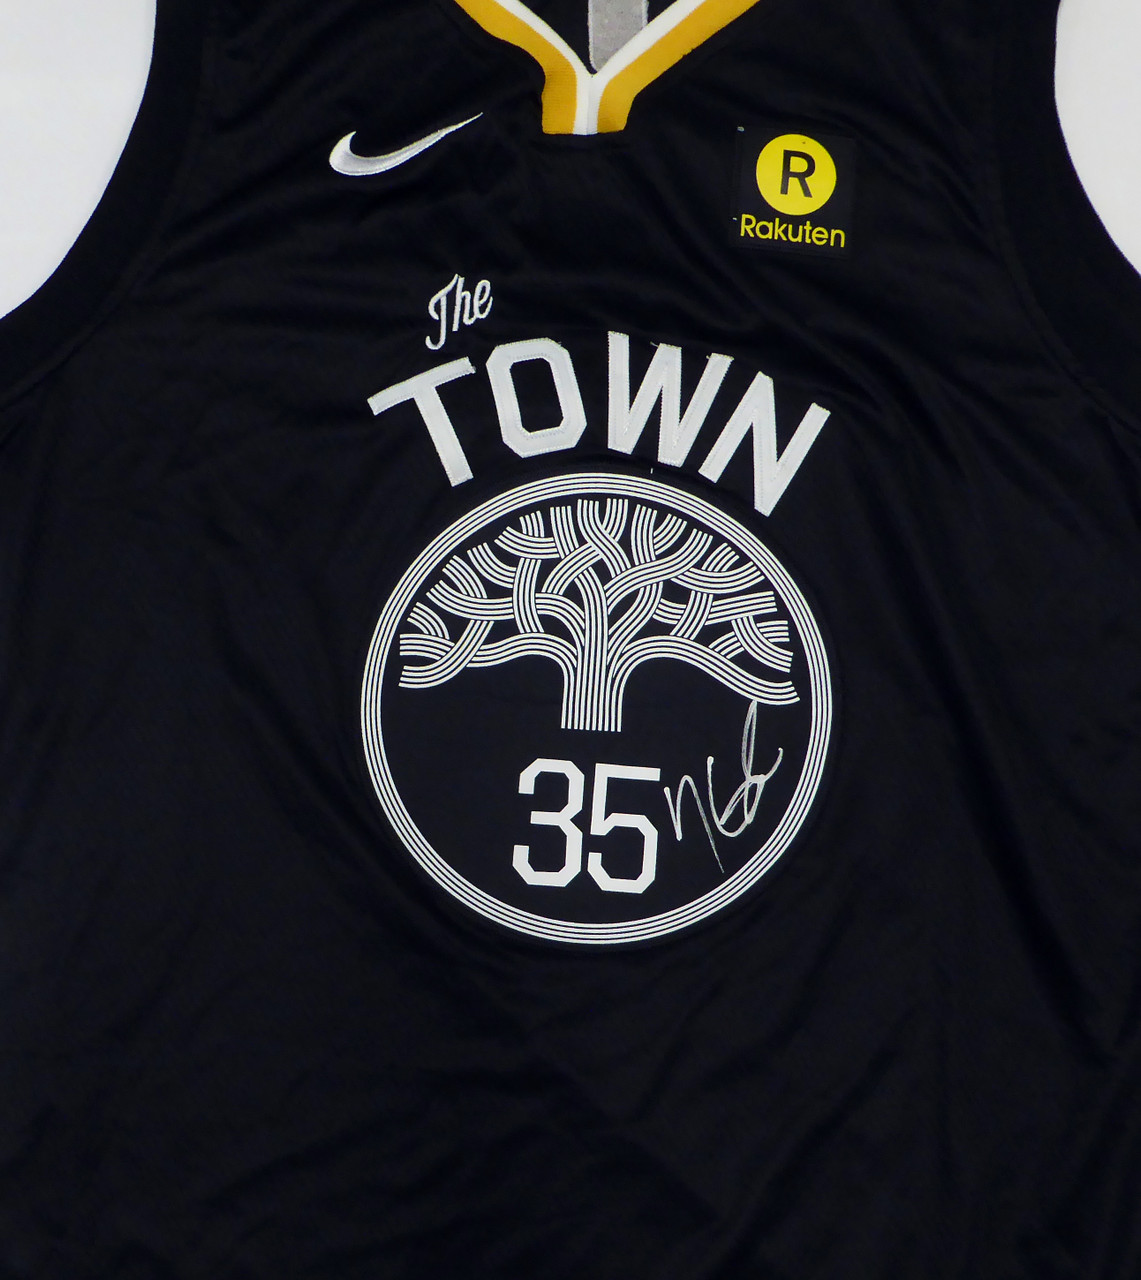 warriors black jersey the town